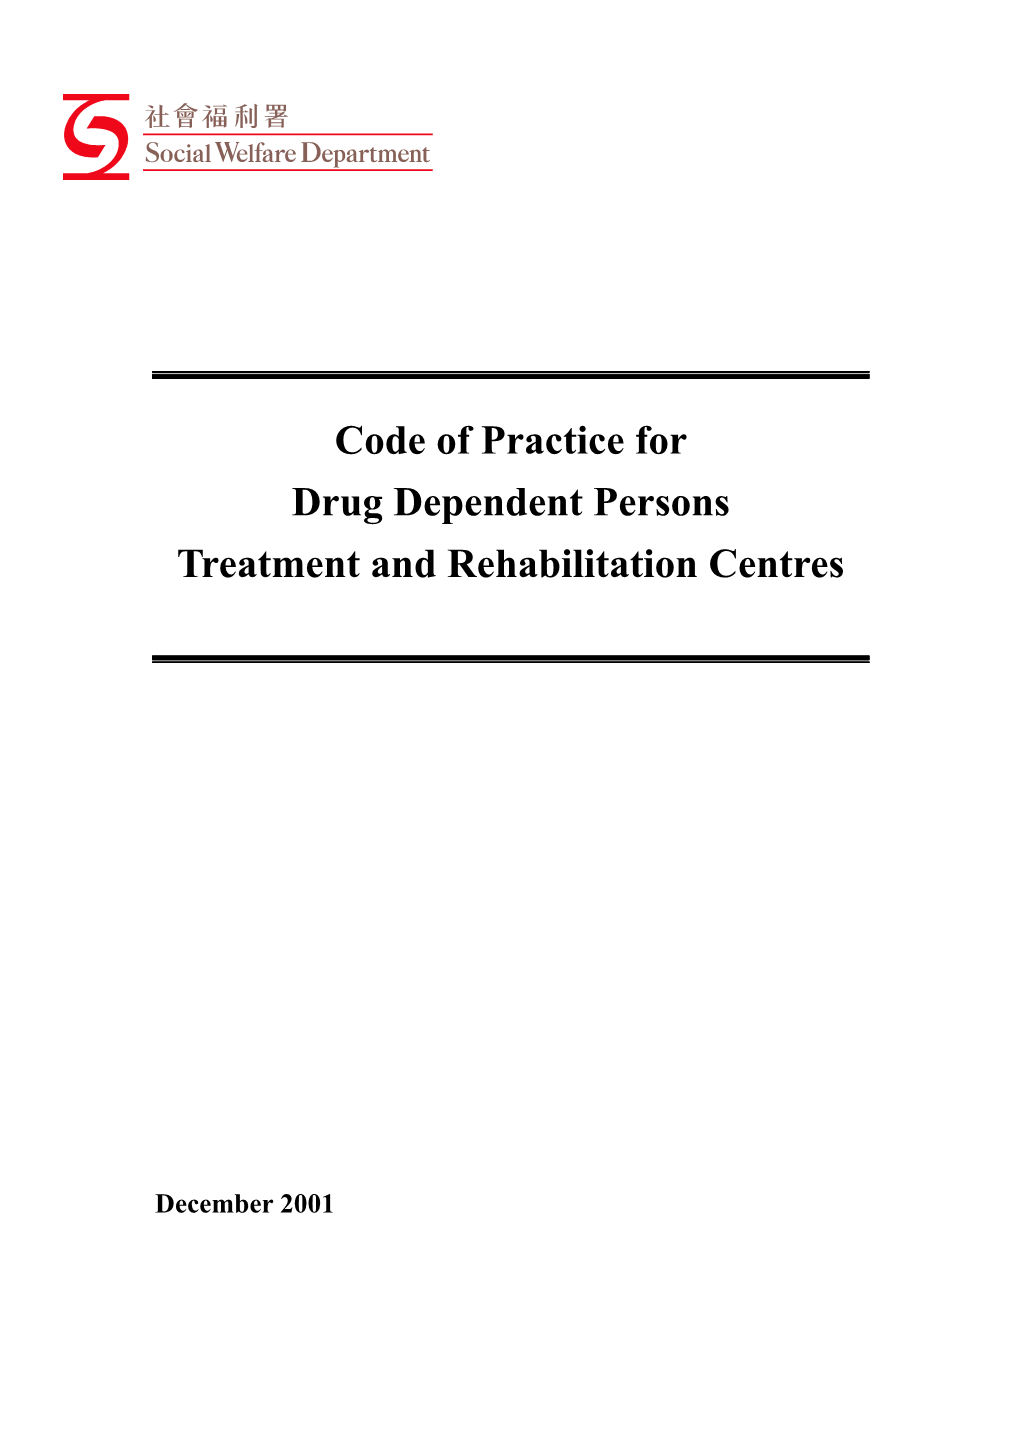 Code of Practice for Drug Dependent Persons Treatment and Rehabilitation Centres